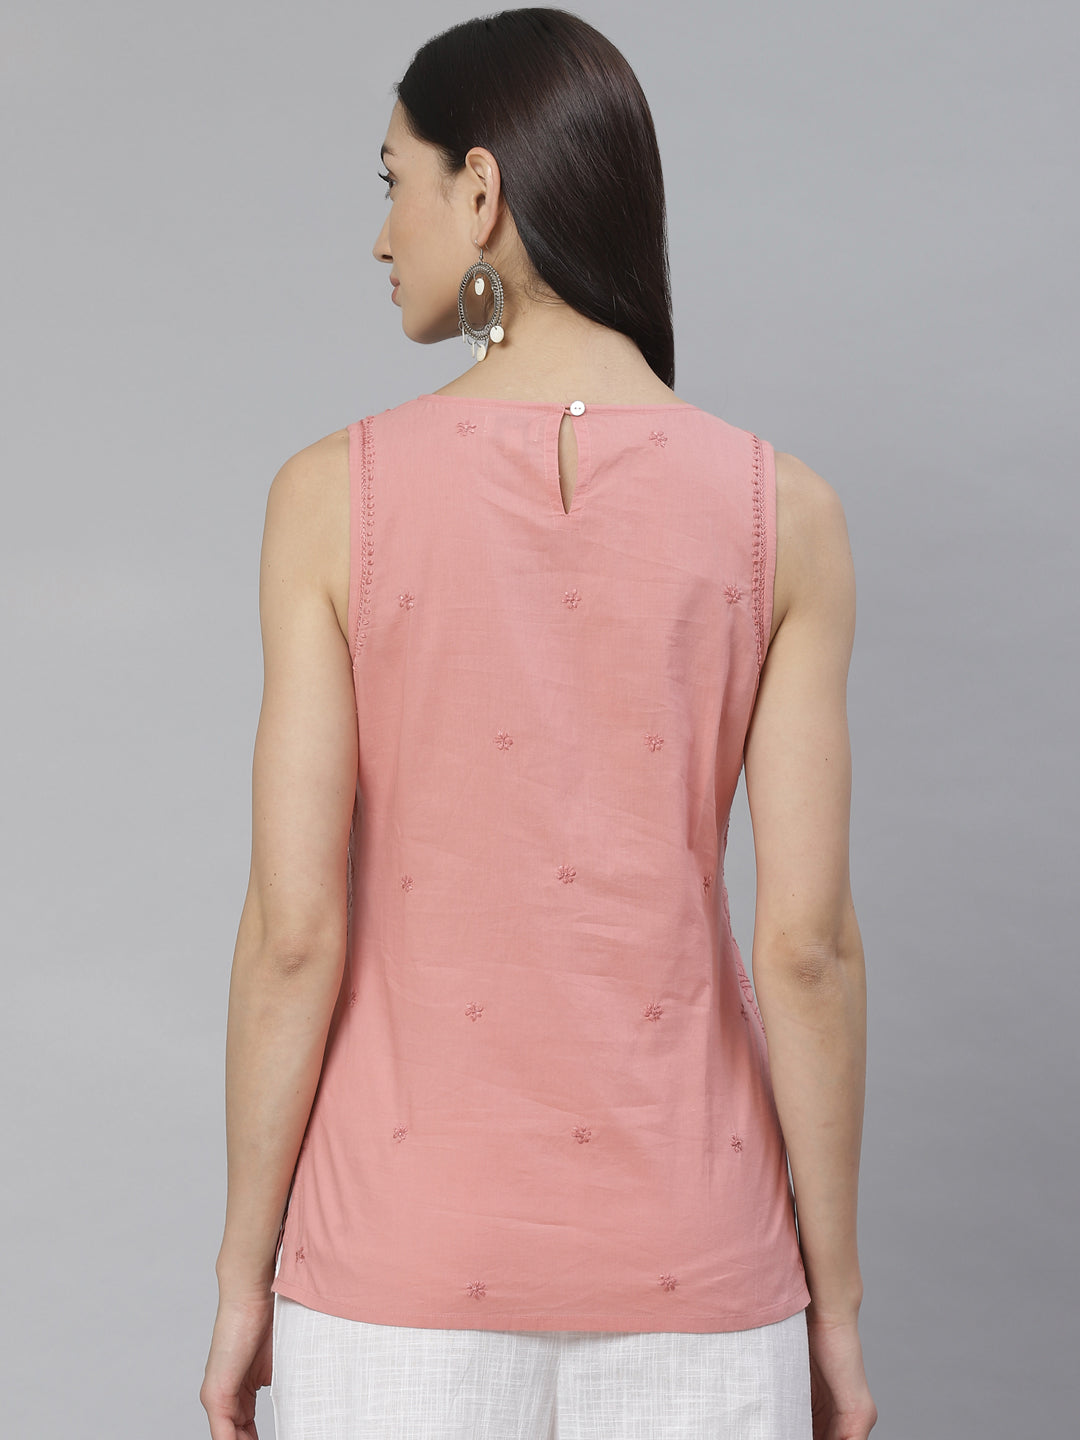 Old Rose Sleeveless Embroidered Top